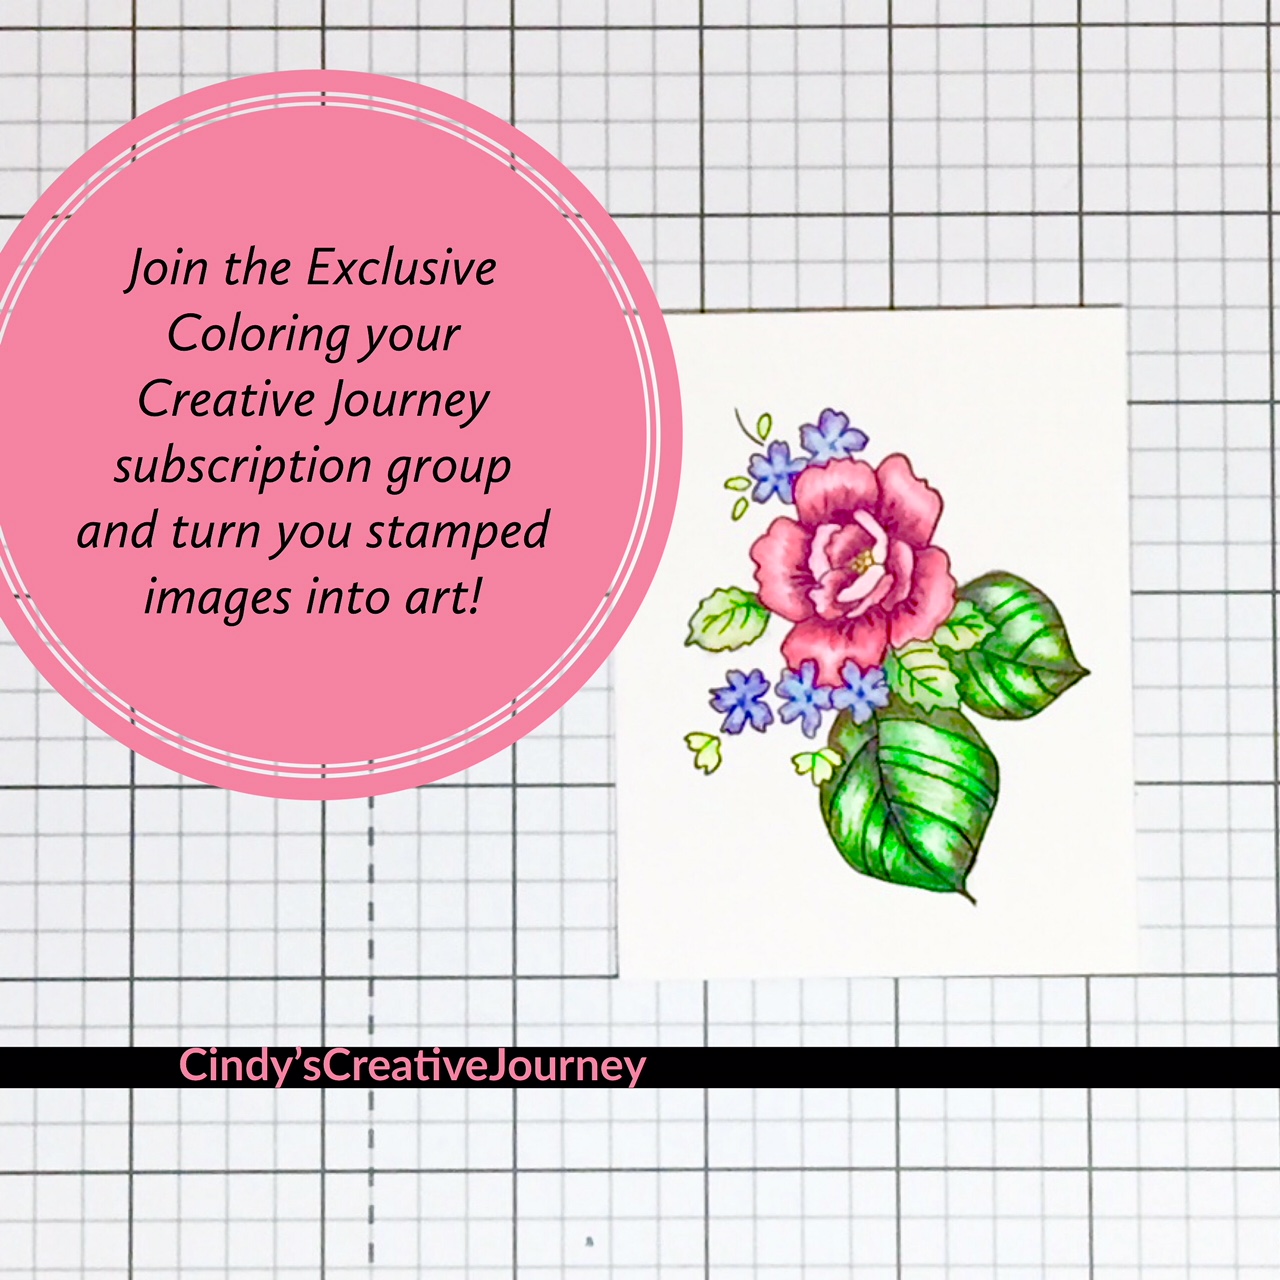 Coloring Your Creative Journey, an Exclusive Subscription Group